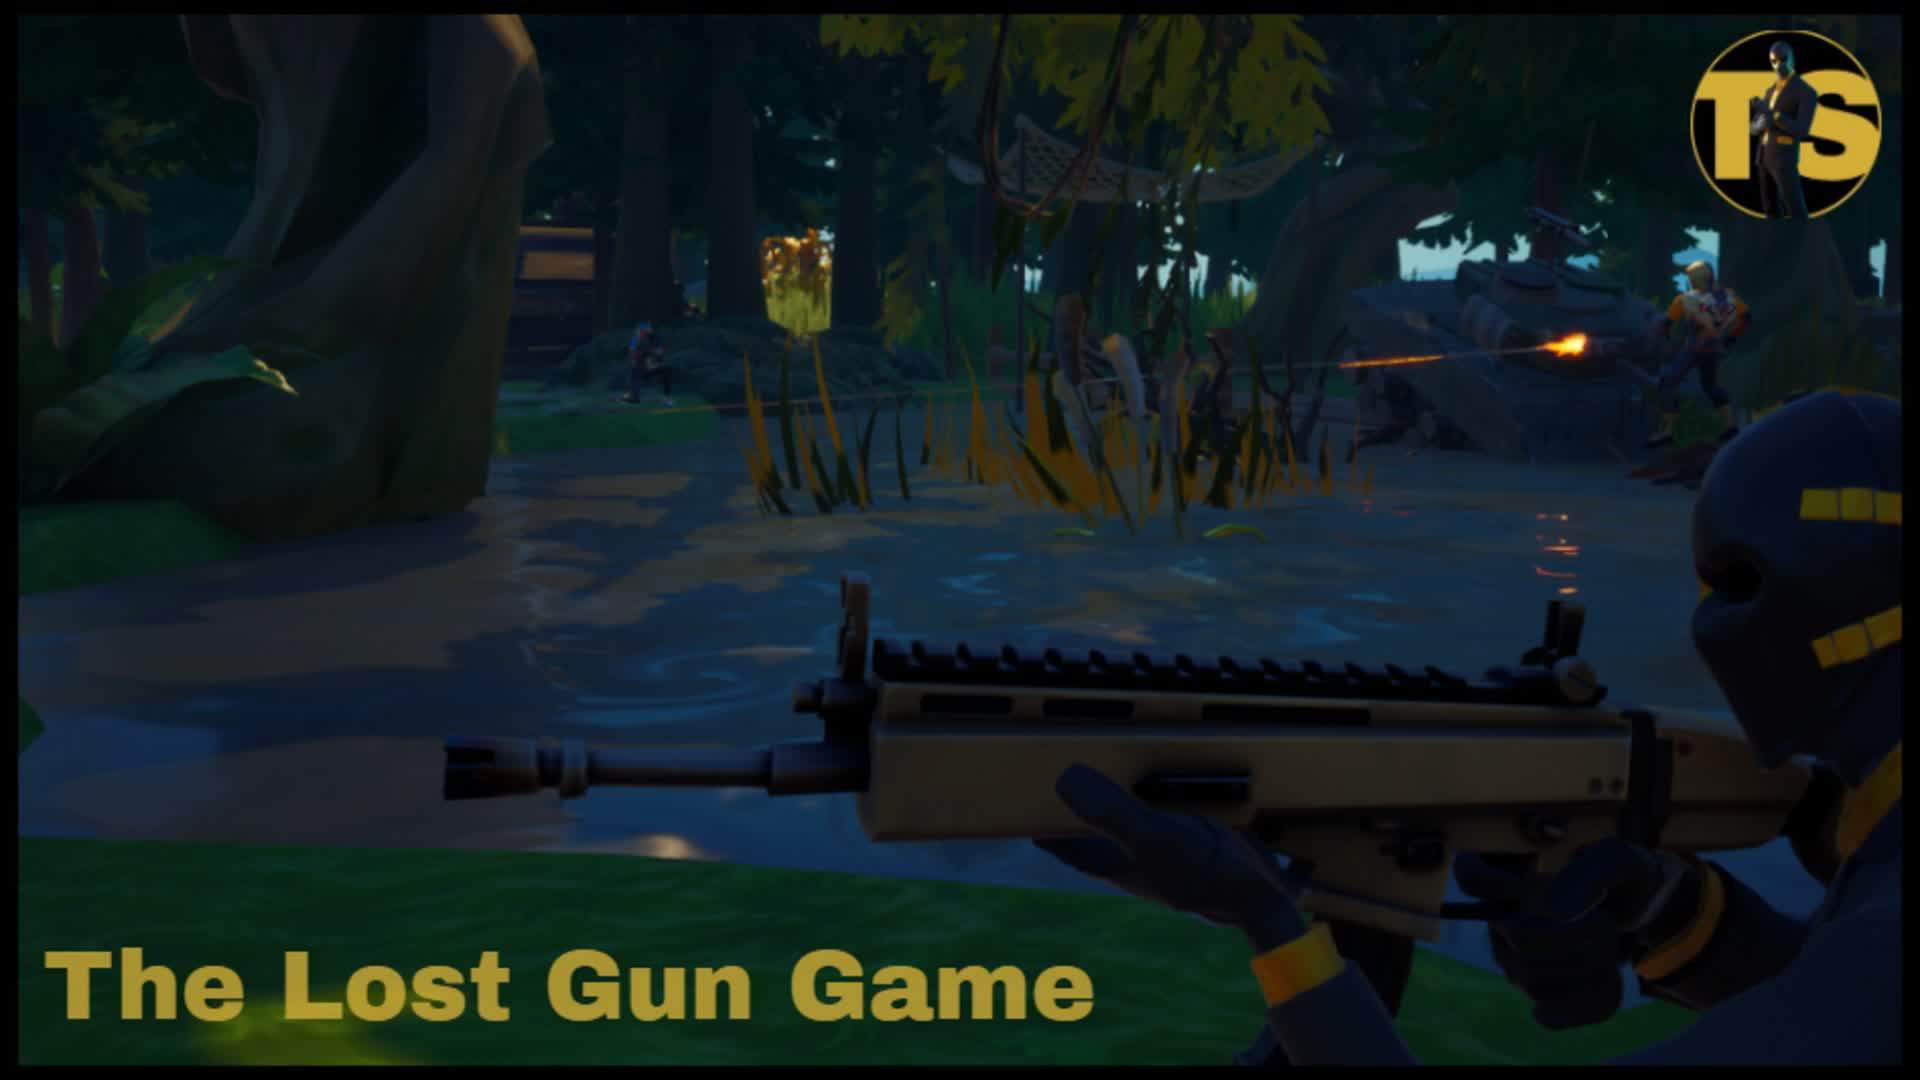 THE LOST GUN GAME